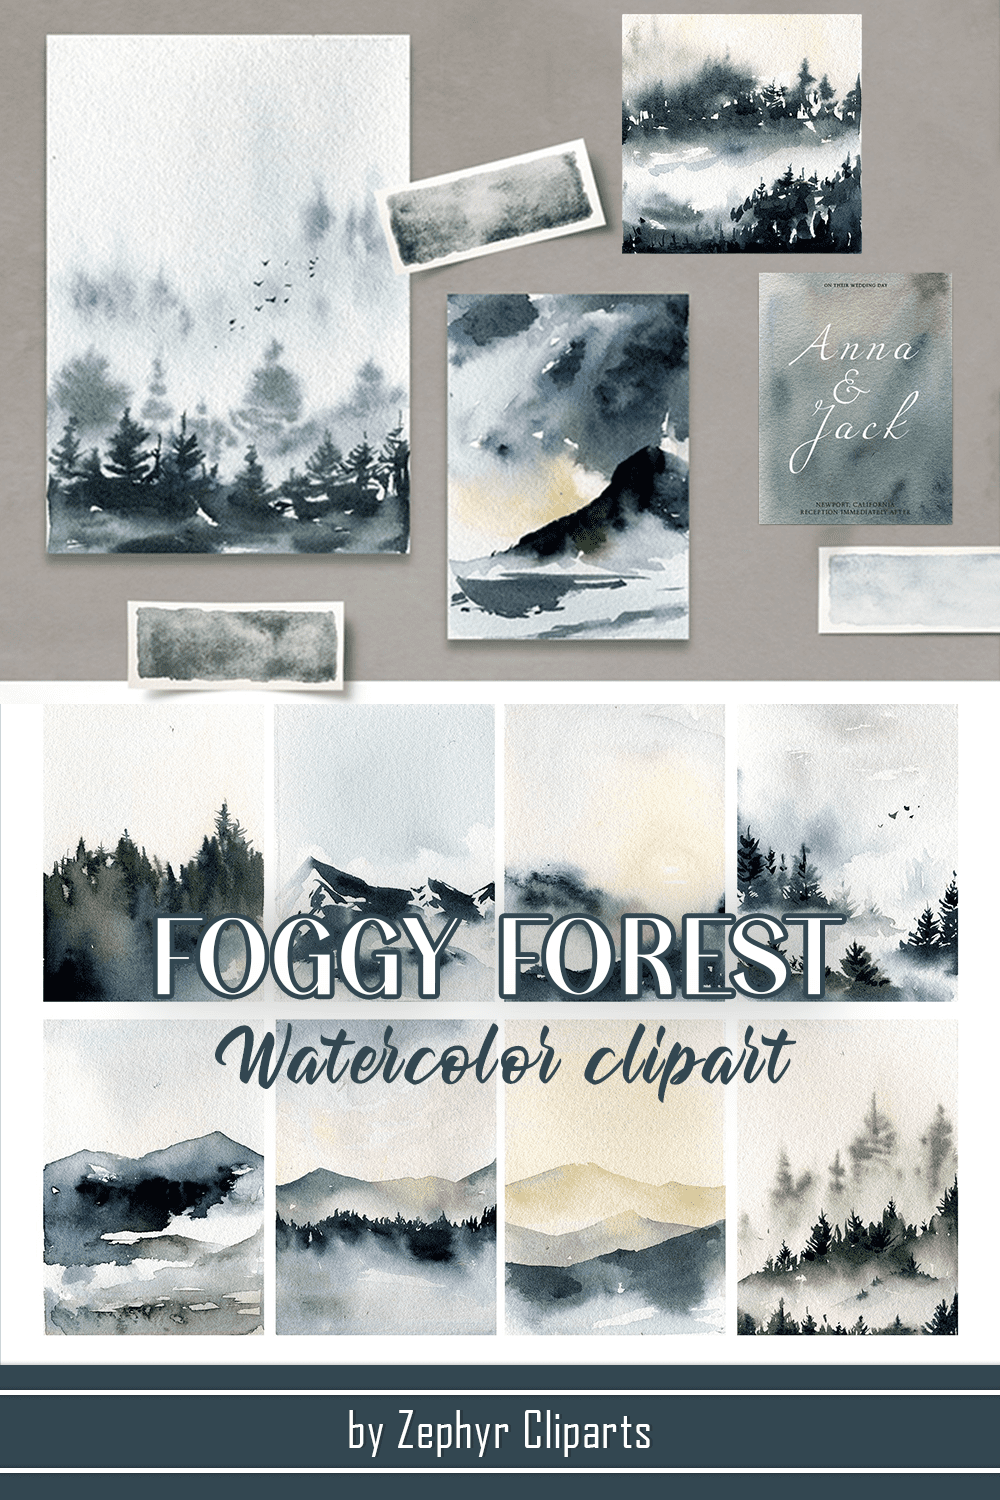 Foggy forest watercolor clipart - pinterest image preview.